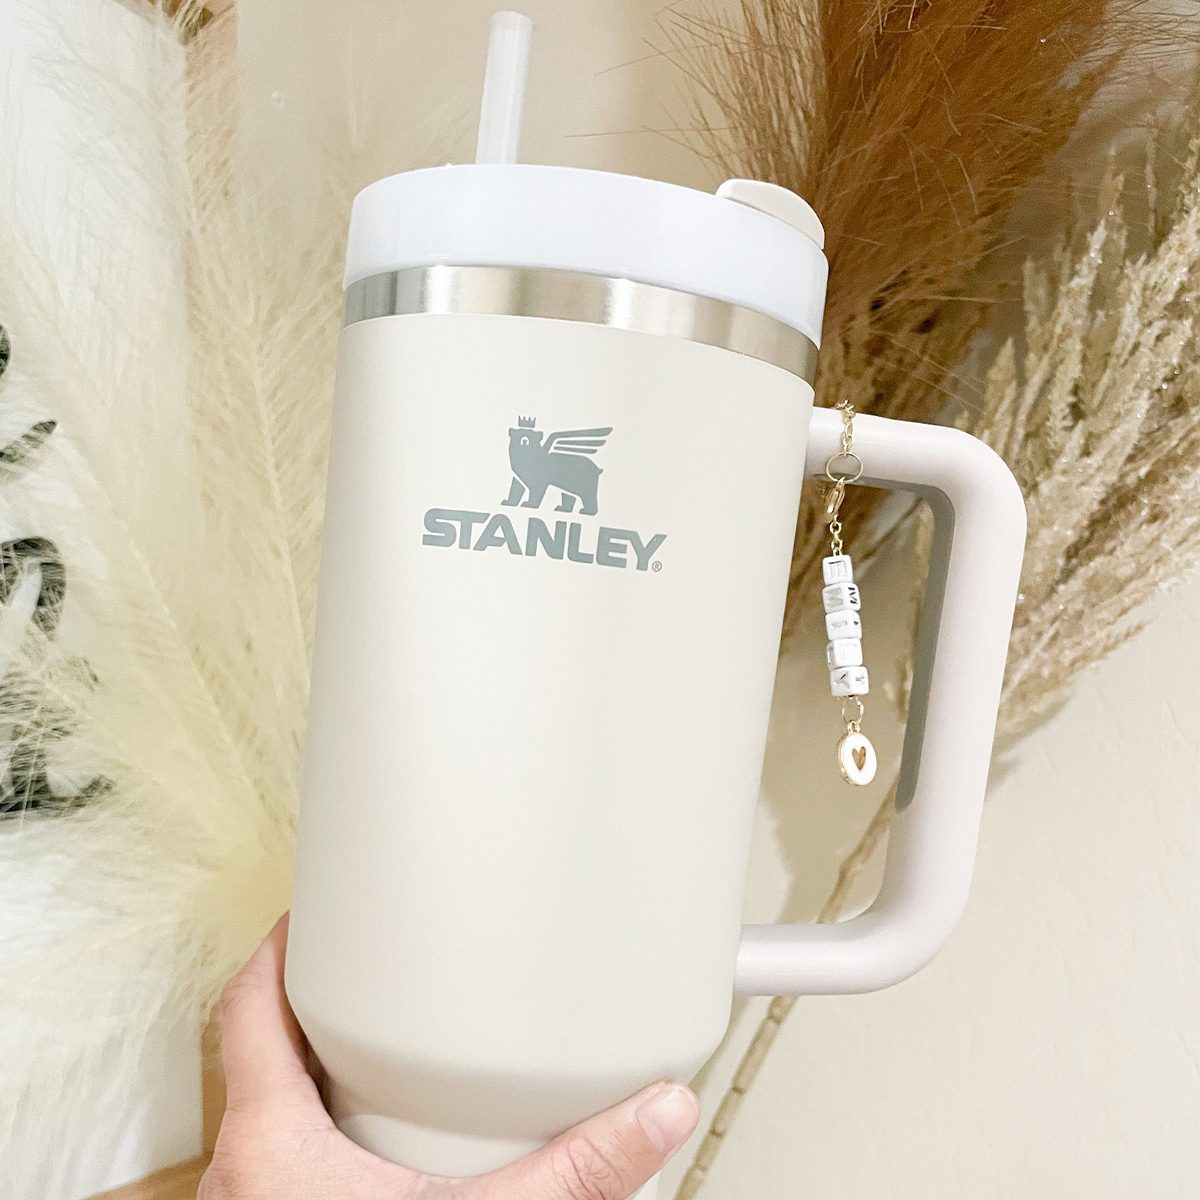 The Best Stanley Cup Accessories on